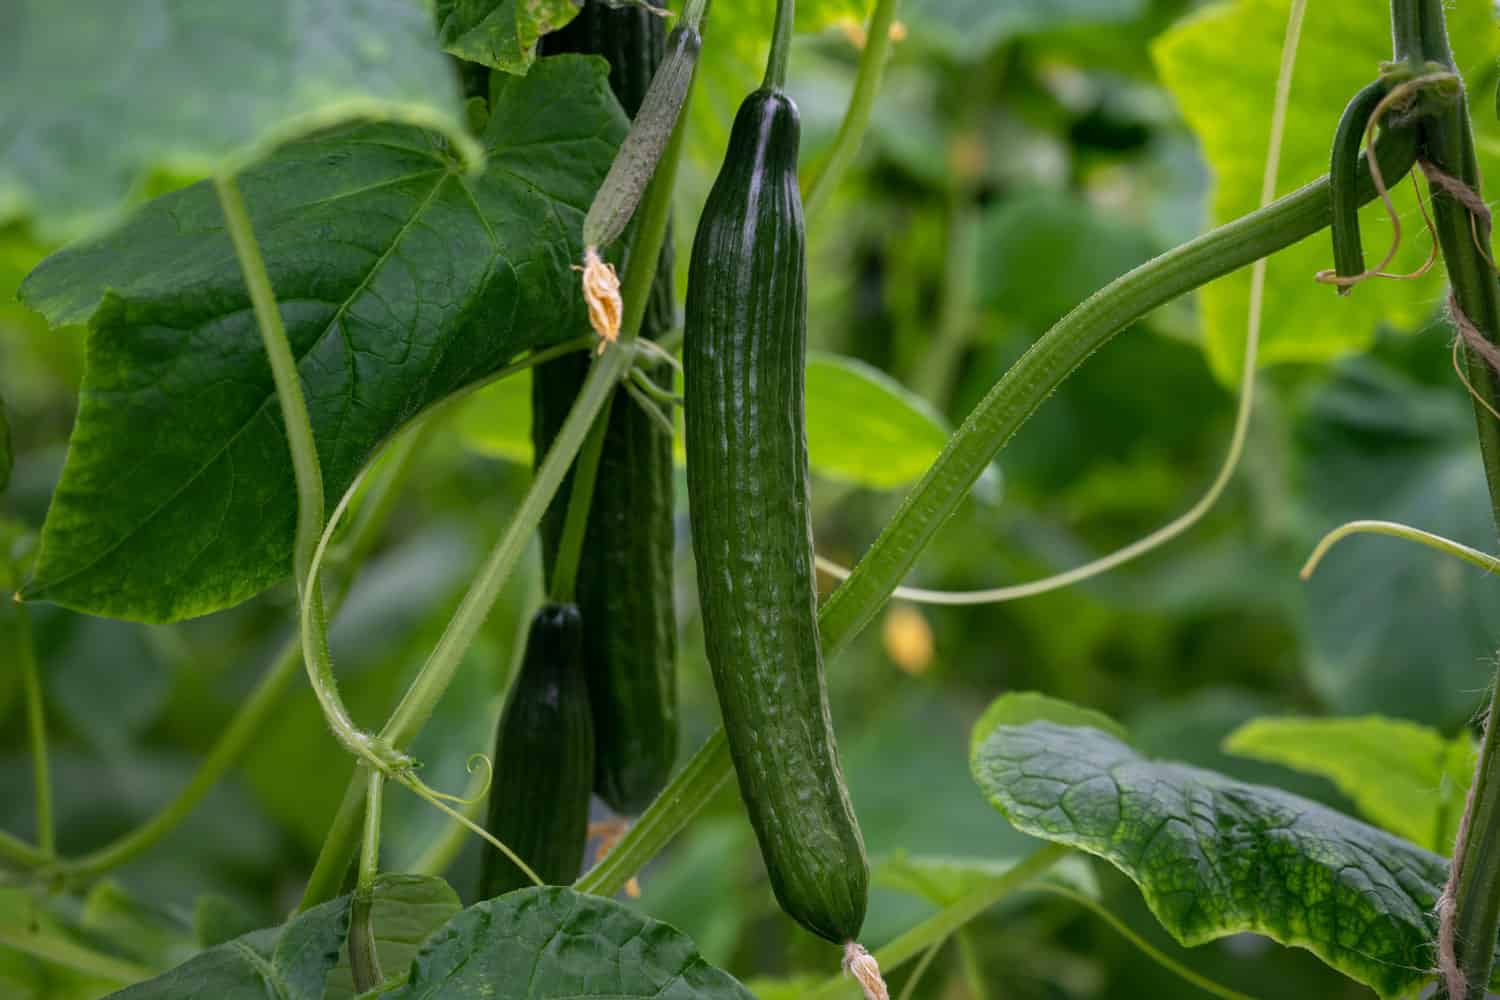 Growing heathy cucumbers ready for harvest